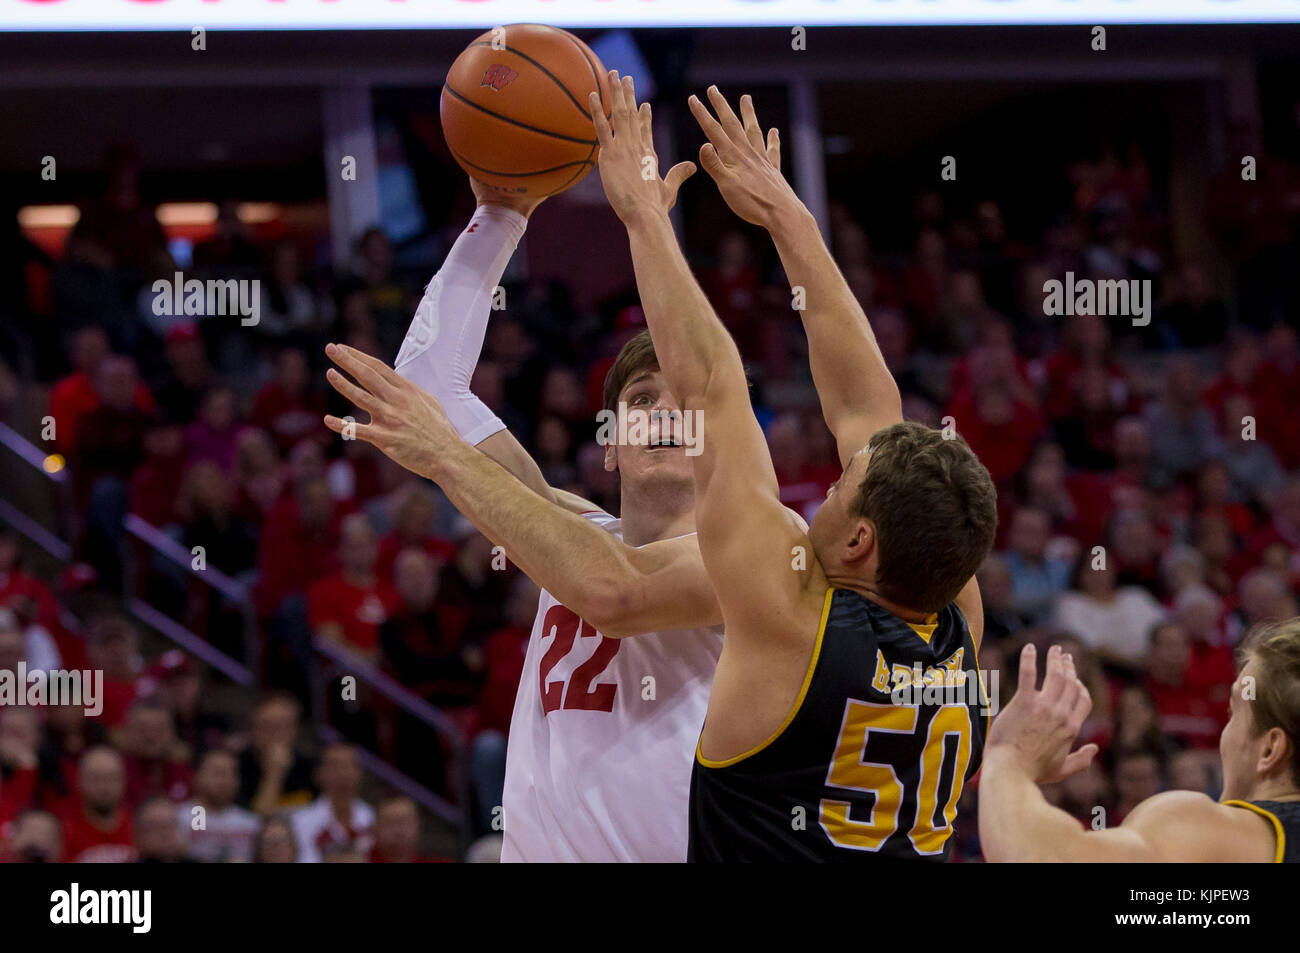 Madison, WI, USA. 24th Nov, 2017. Wisconsin Badgers forward Ethan Happ #22 shoots over Milwaukee Panthers forward Brett Prahl #50 during the NCAA Basketball game between the UW-Milwaukee Panthers and the Wisconsin Badgers at the Kohl Center in Madison, WI. Wisconsin defeated UW-Milwaukee 71-49. John Fisher/CSM/Alamy Live News Stock Photo